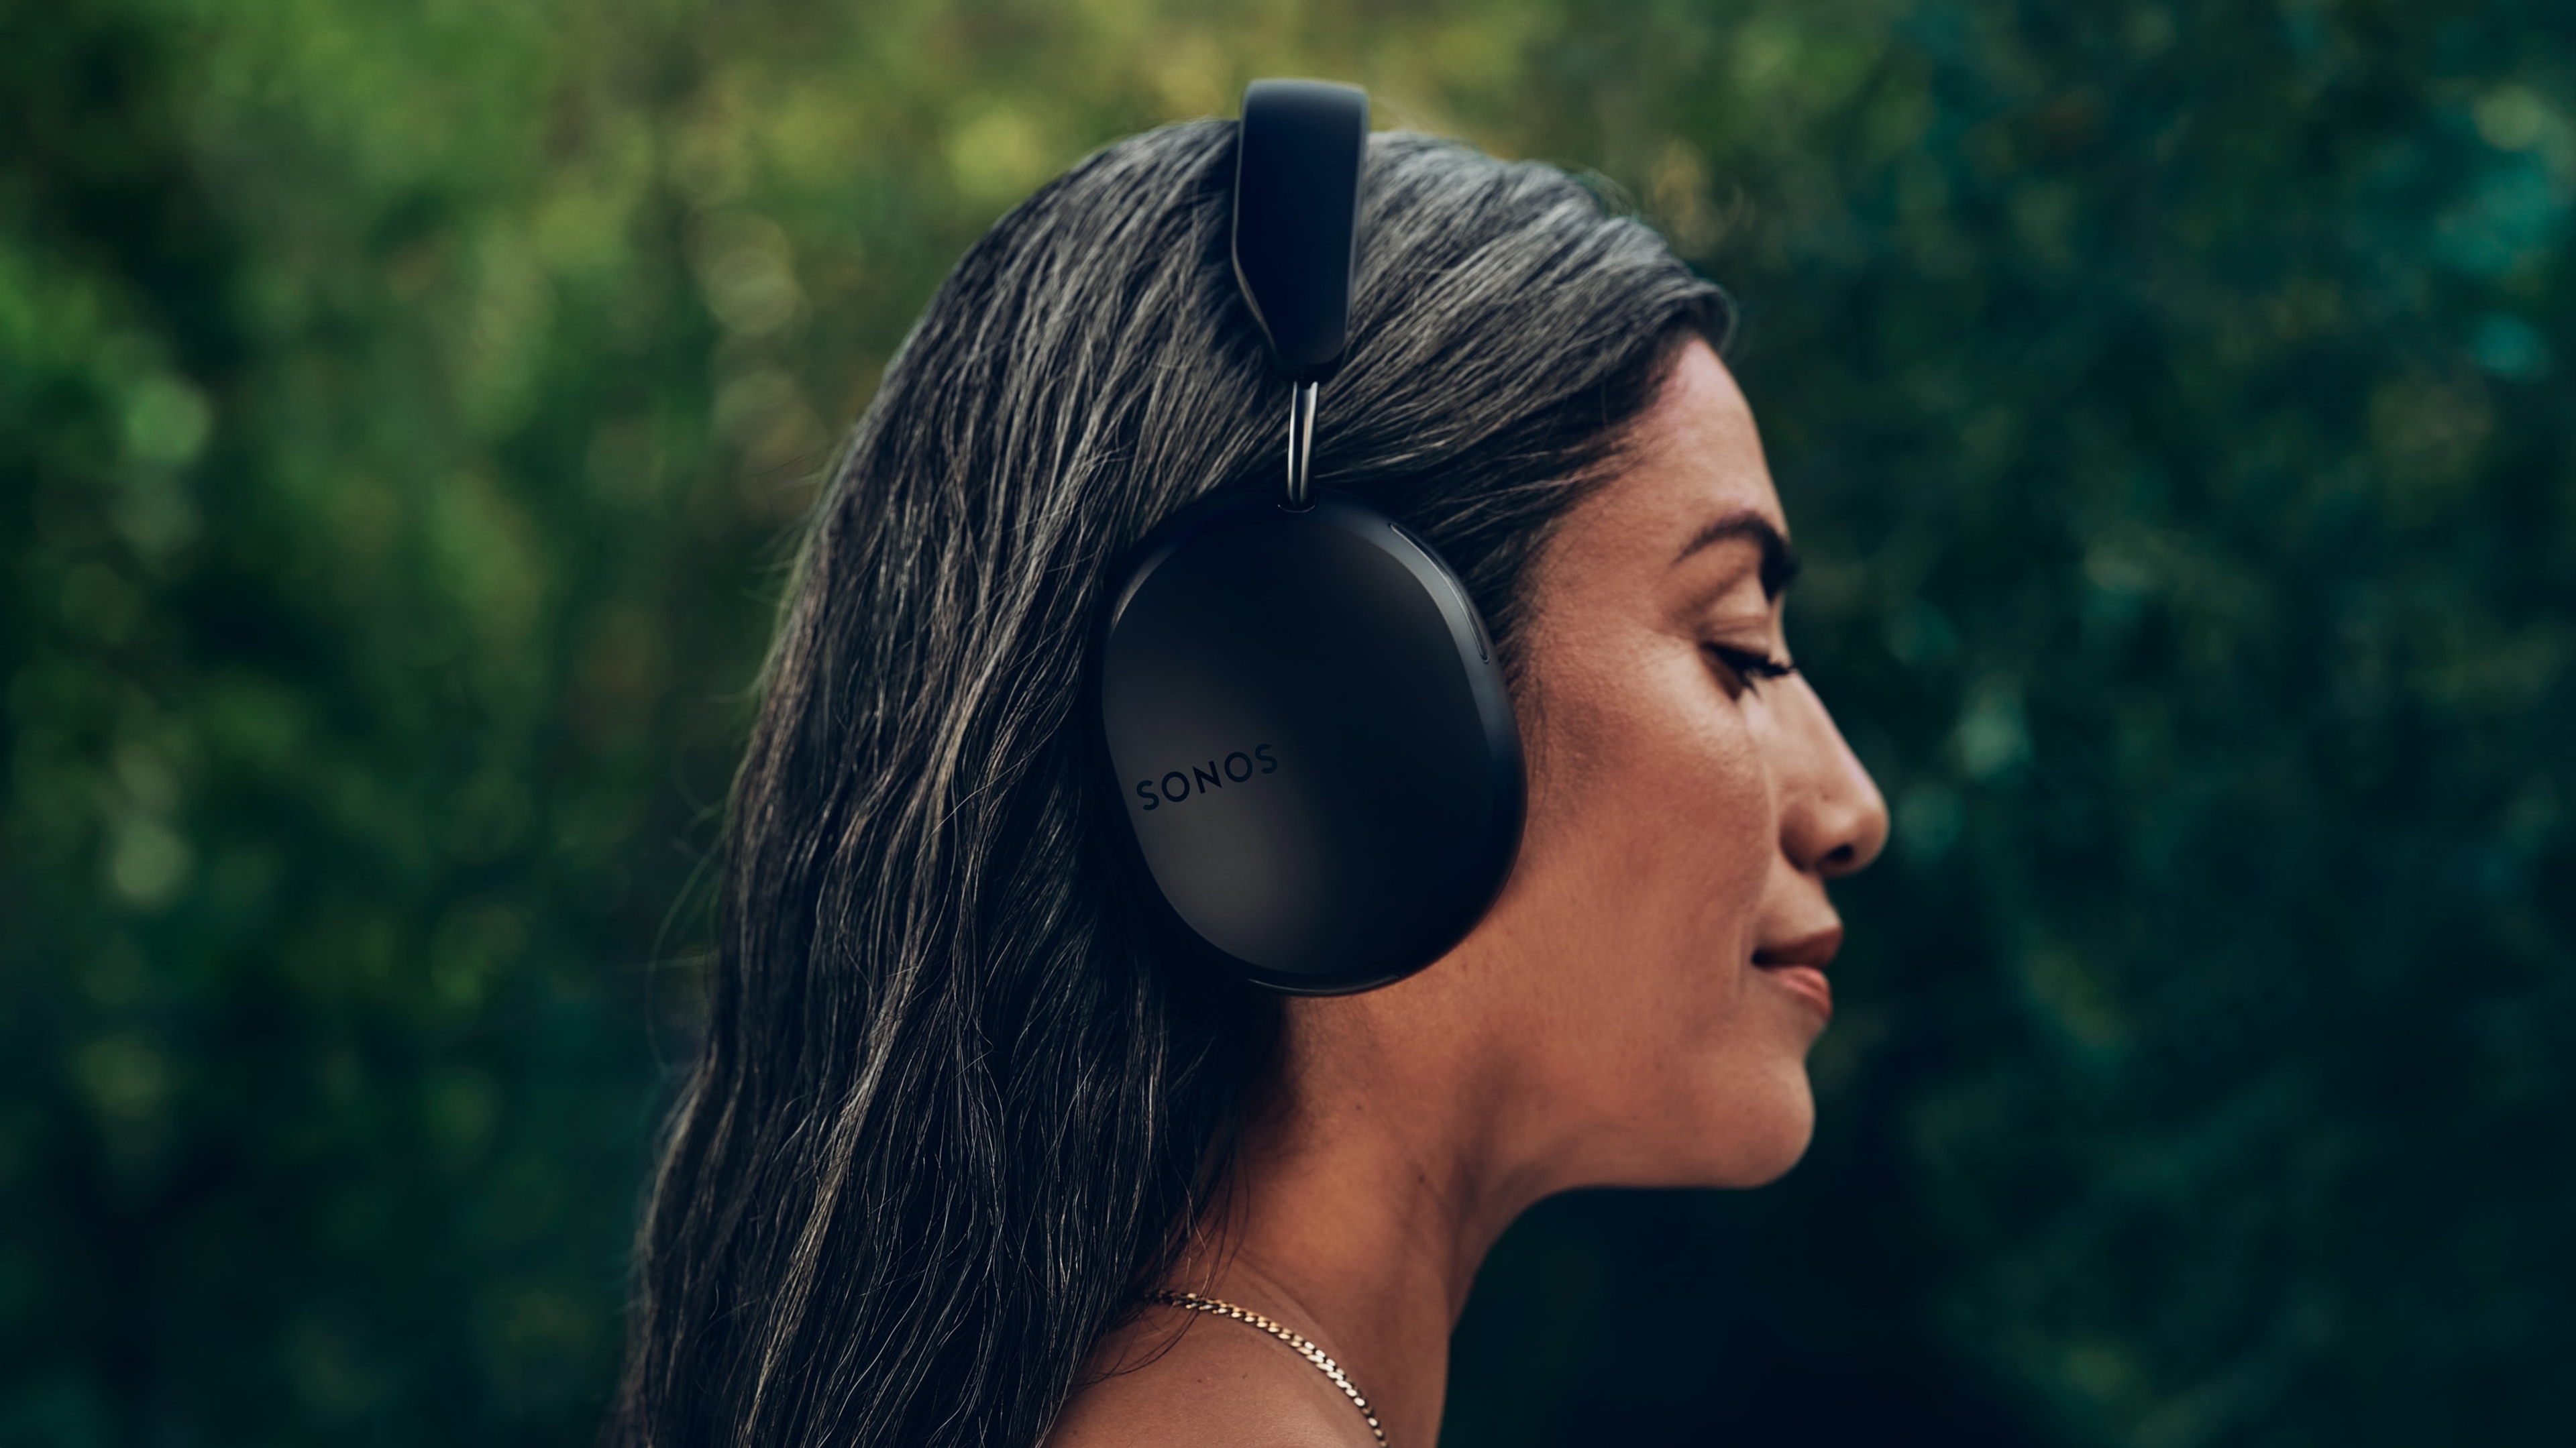 Side profile of a female user wearing a pair of black Sonos Ace headphones